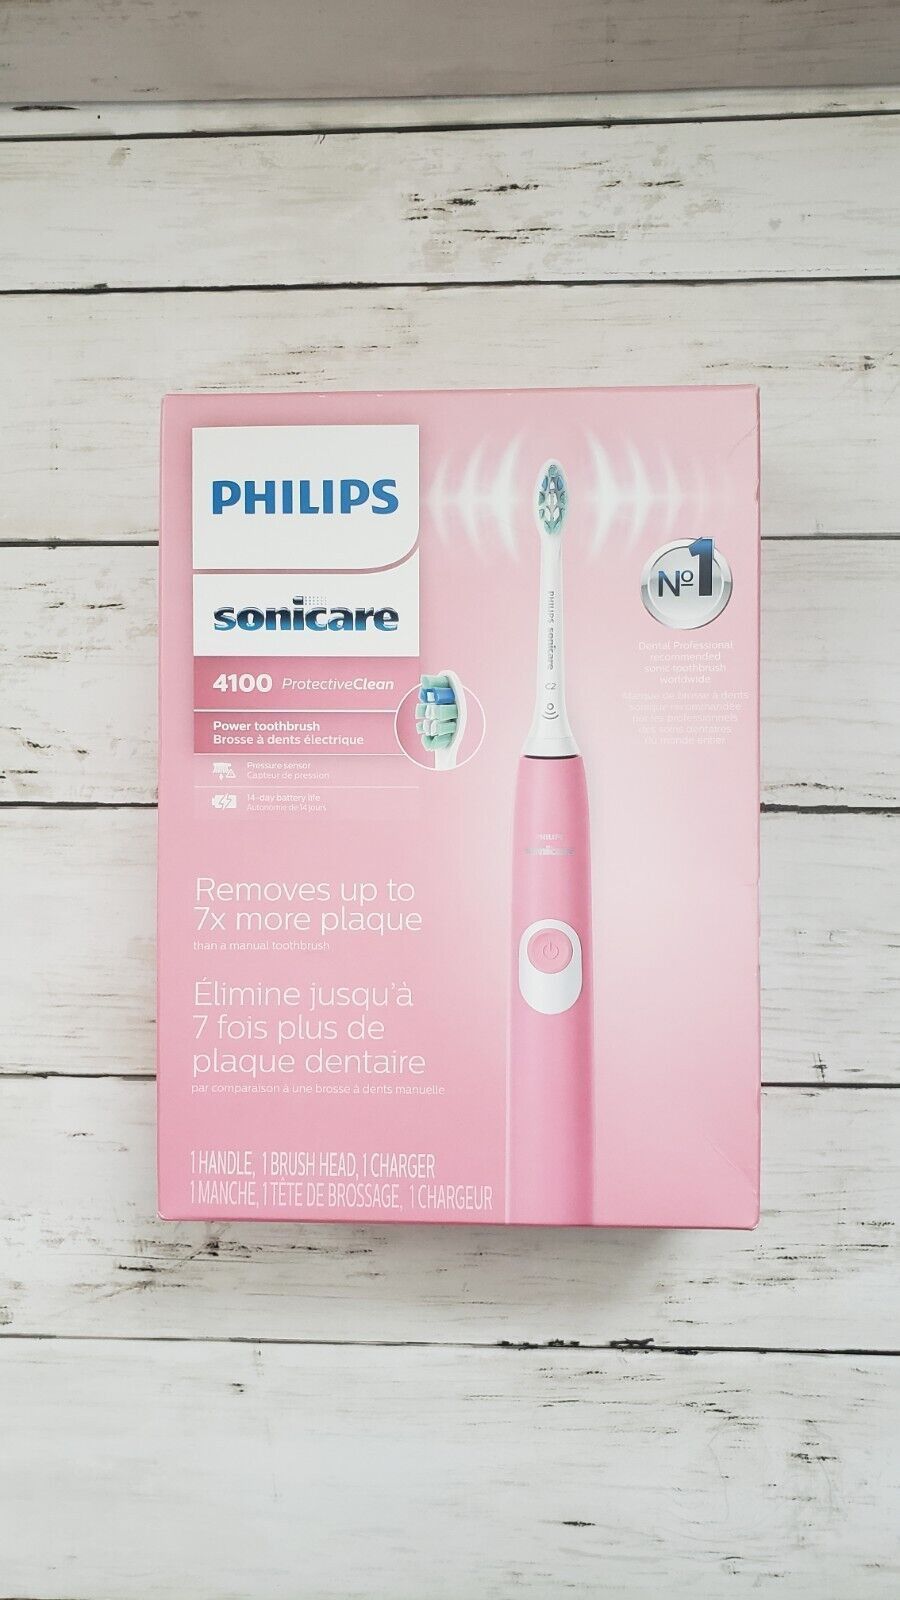 Phillips Sonicare Electric Toothbrush(PINK)